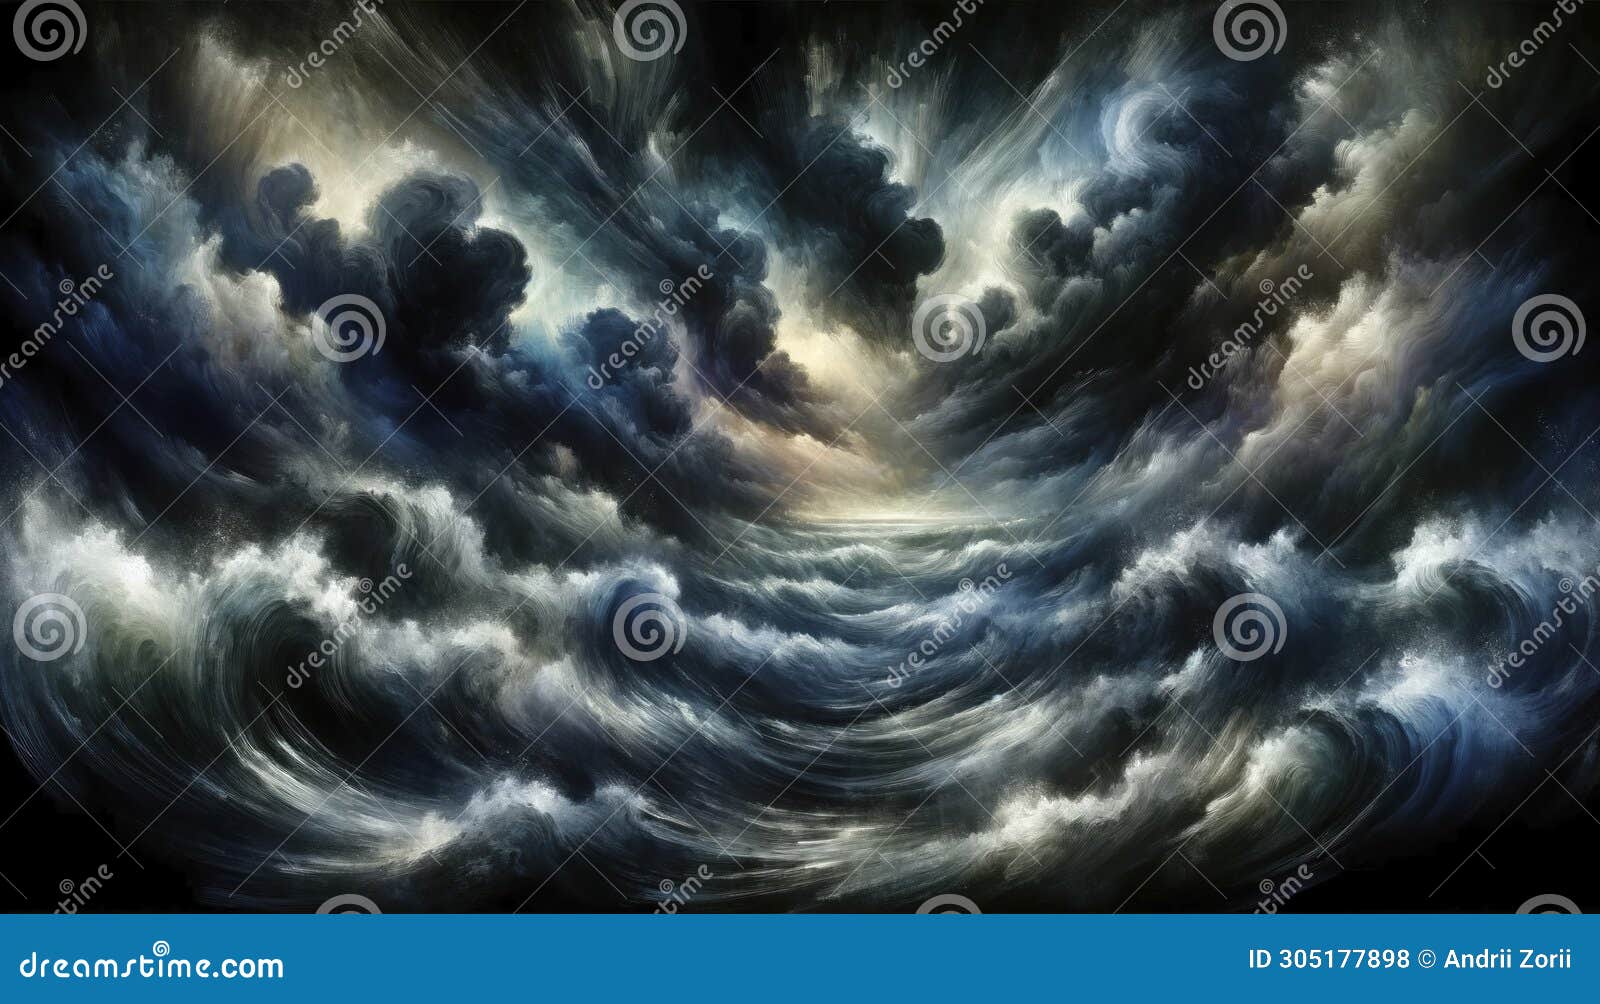 abstract depiction of stormy sea under dark skies, izing emotional unrest